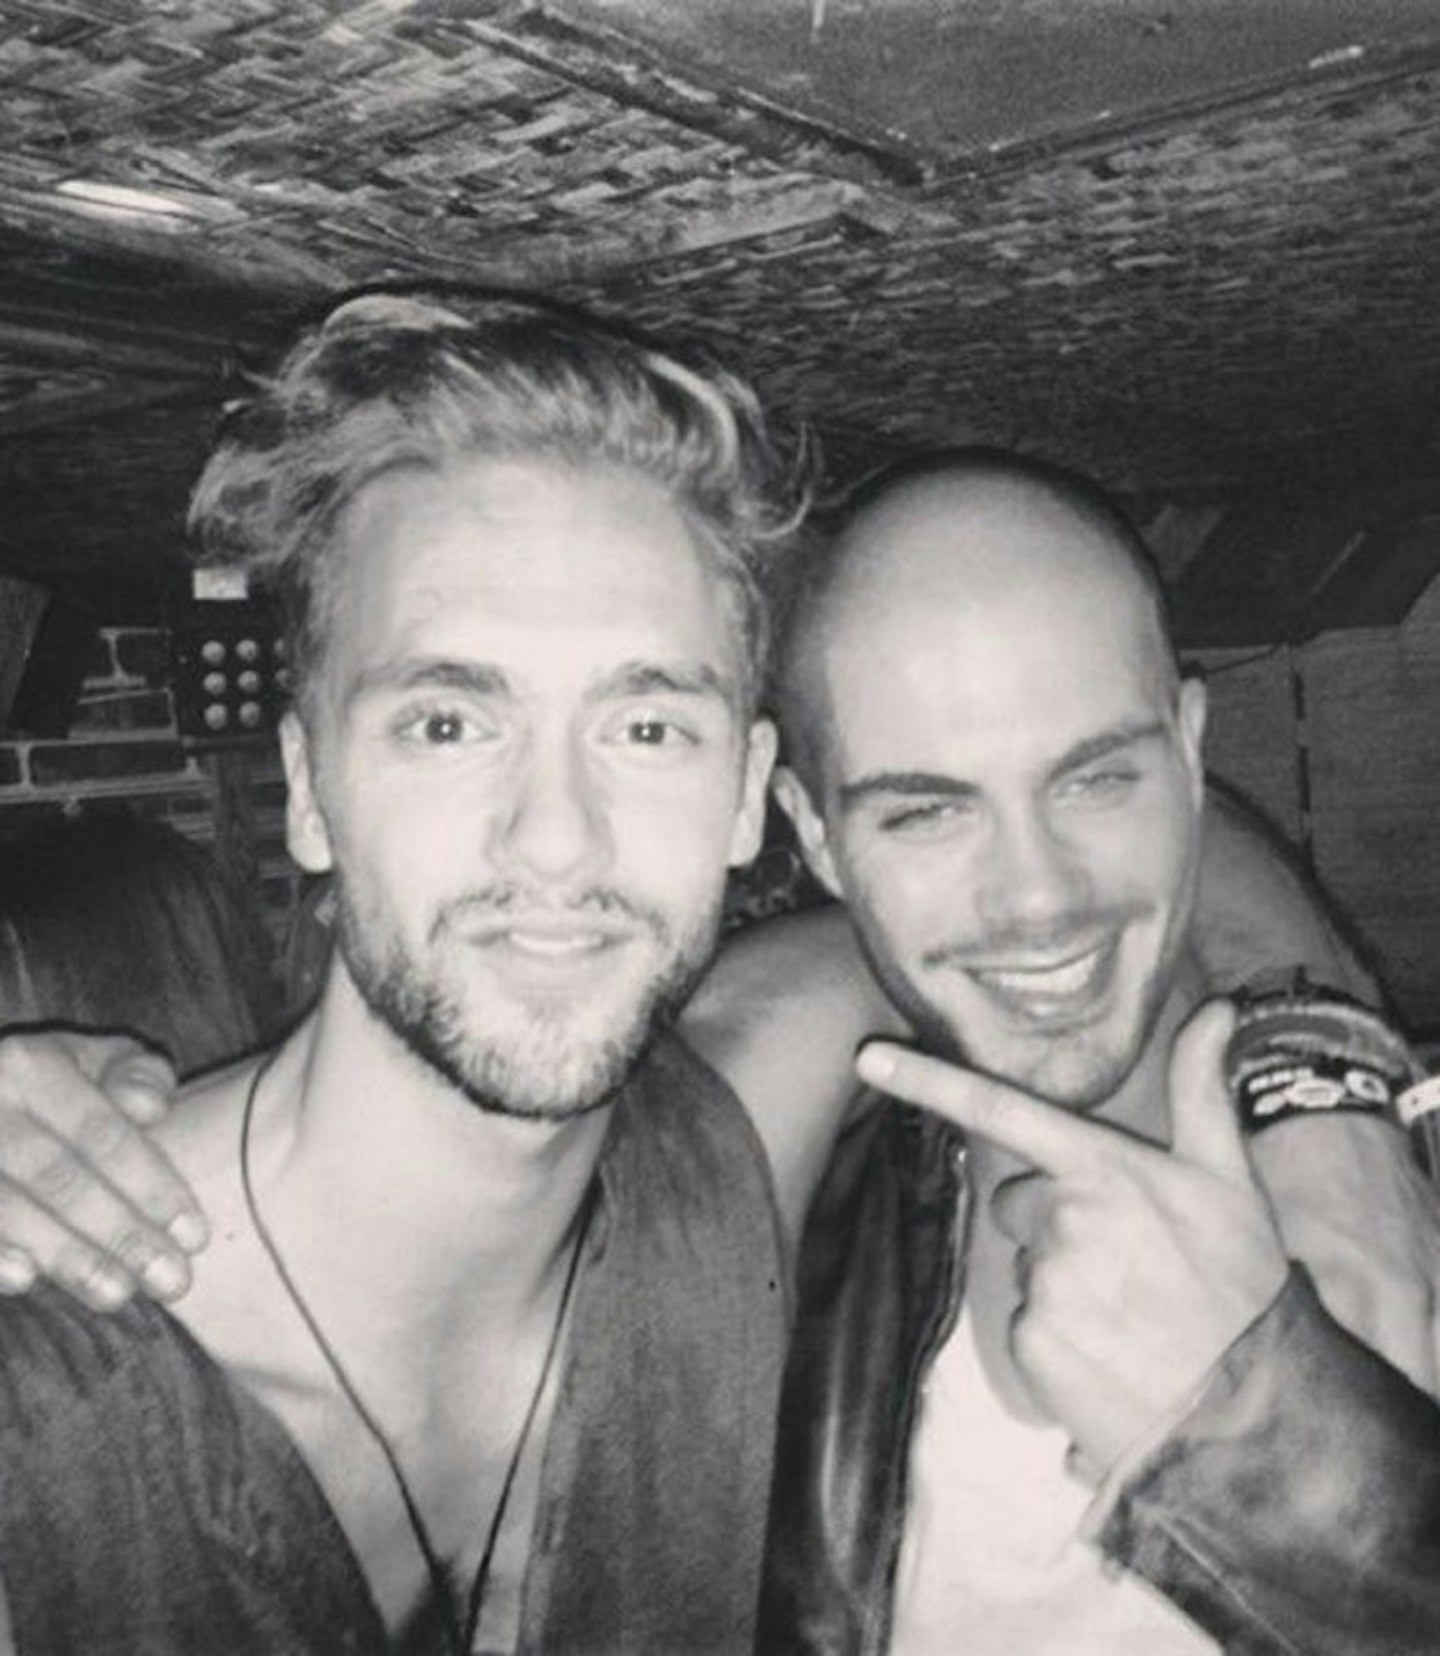 Andy from Lawson and Max from The Wanted